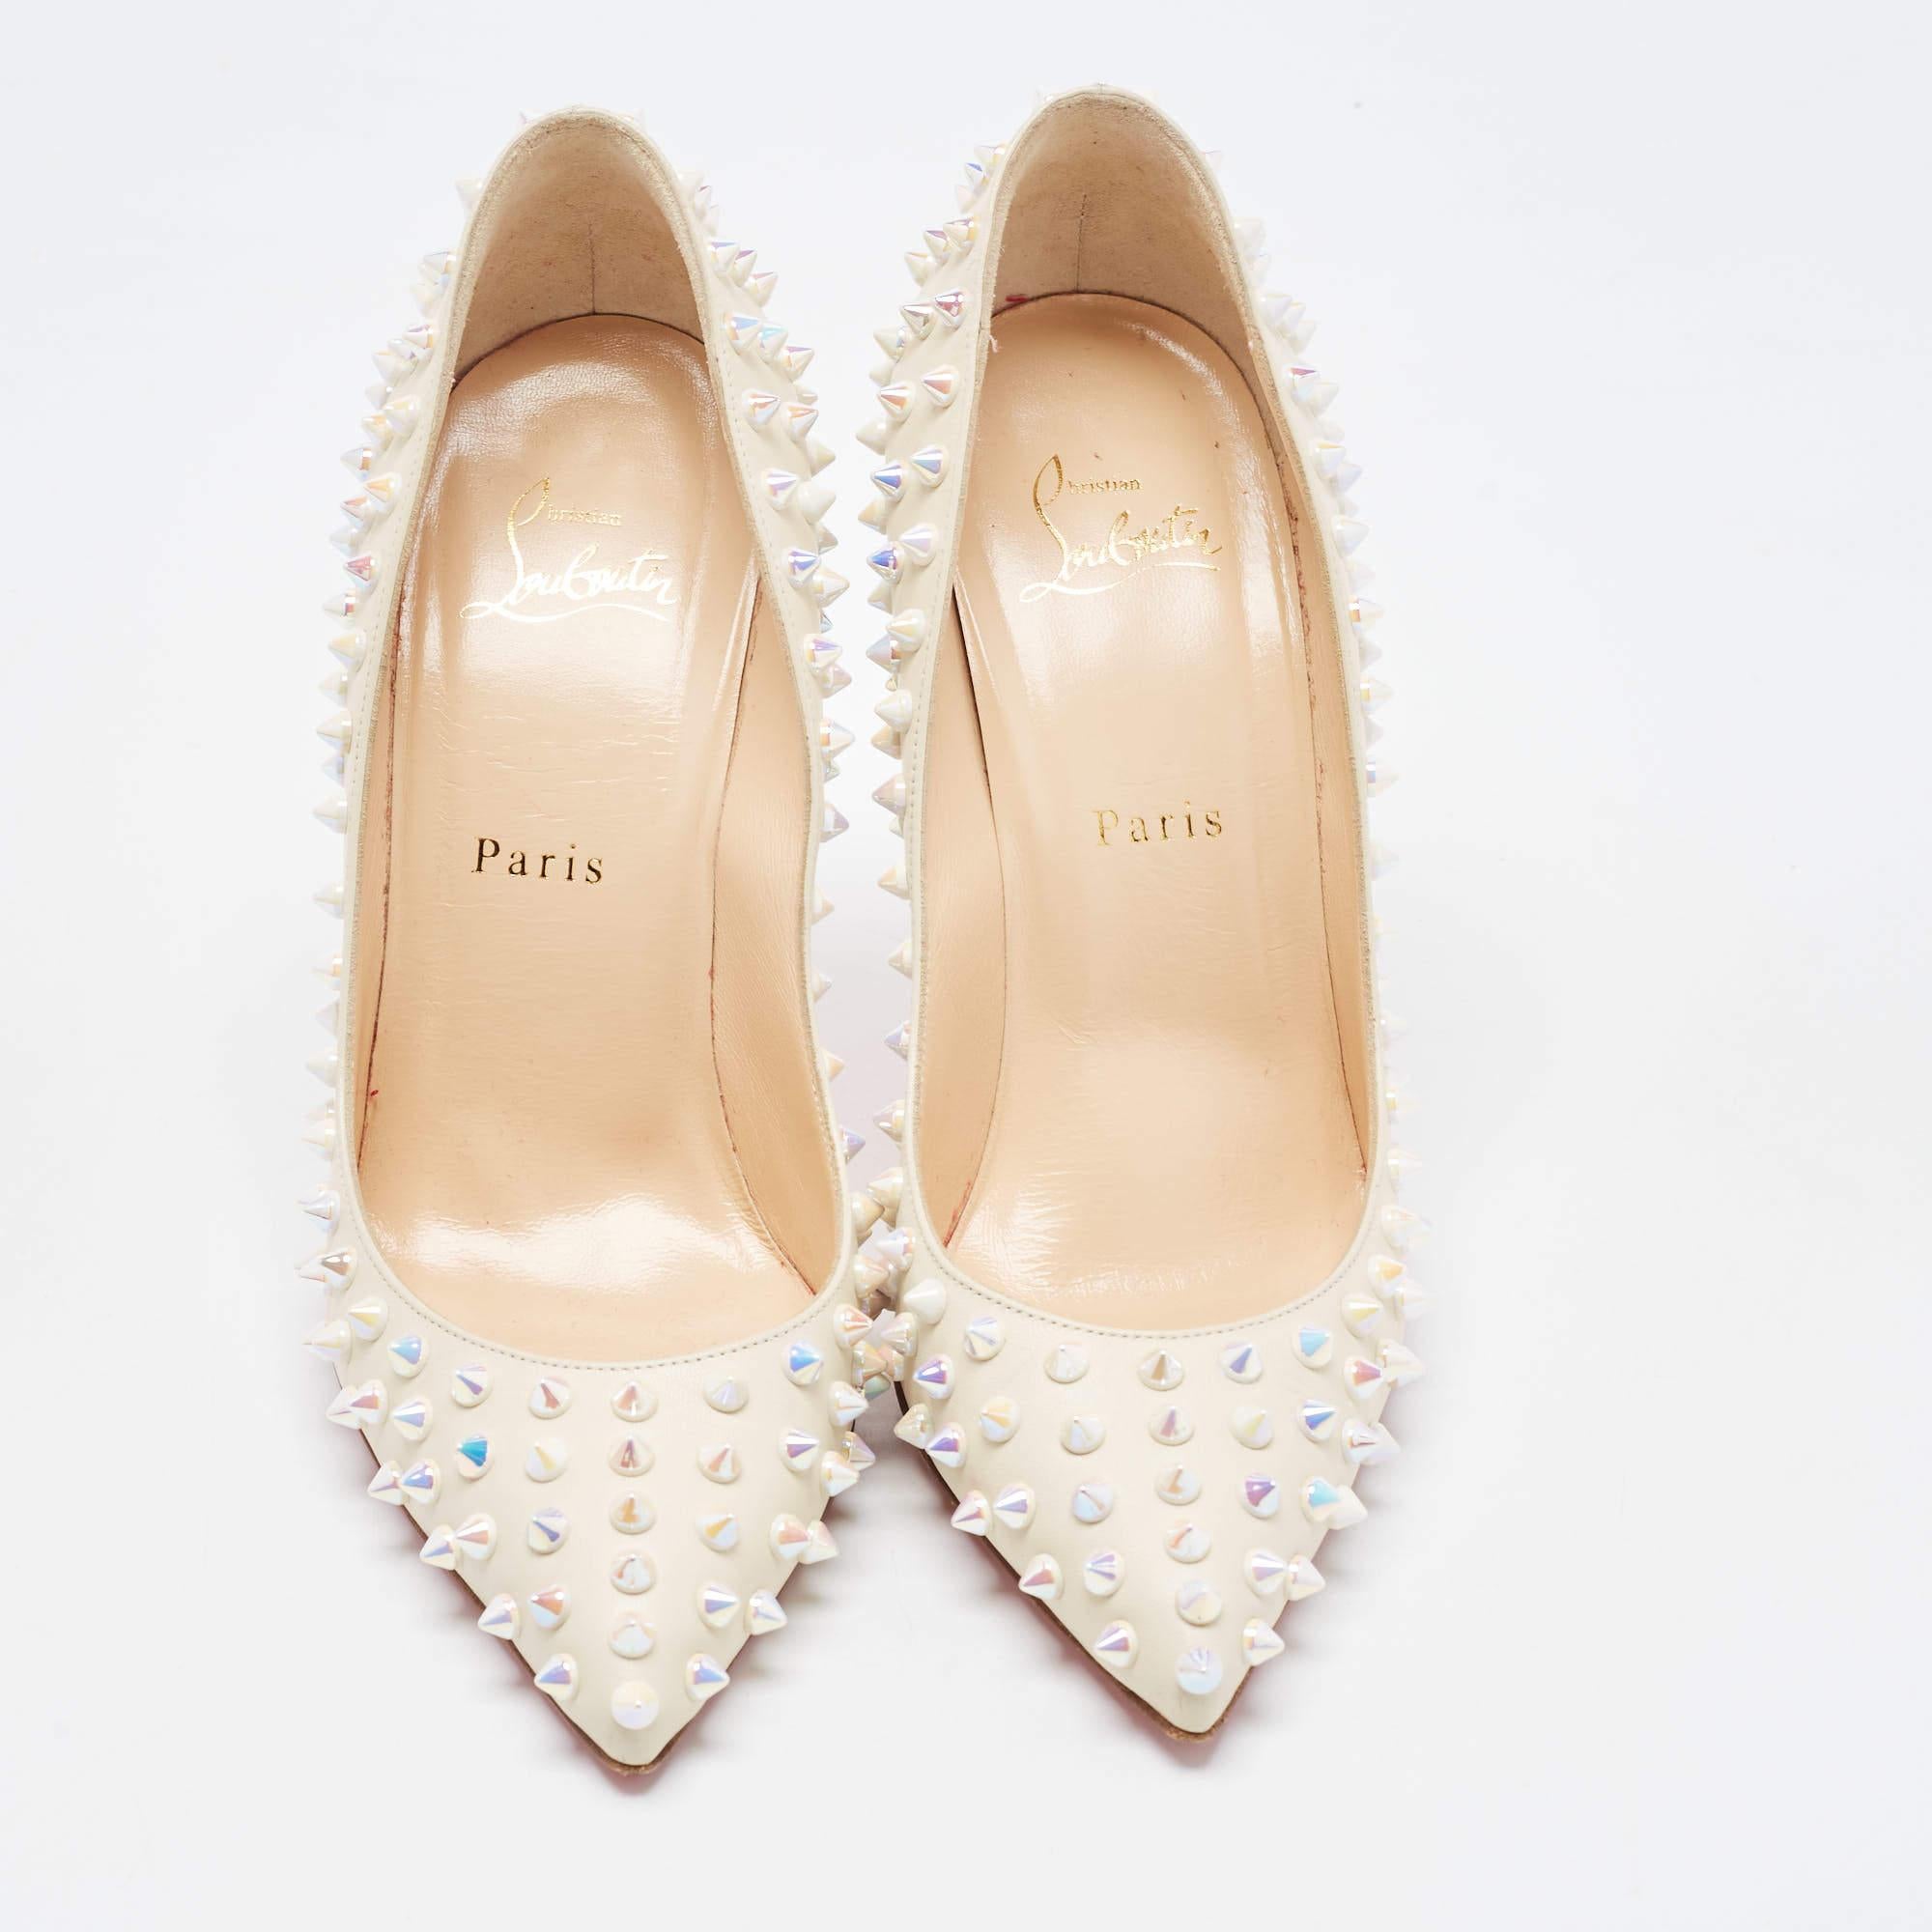 Beige Christian Louboutin Cream Leather Pigalle Spikes Pumps Size 38